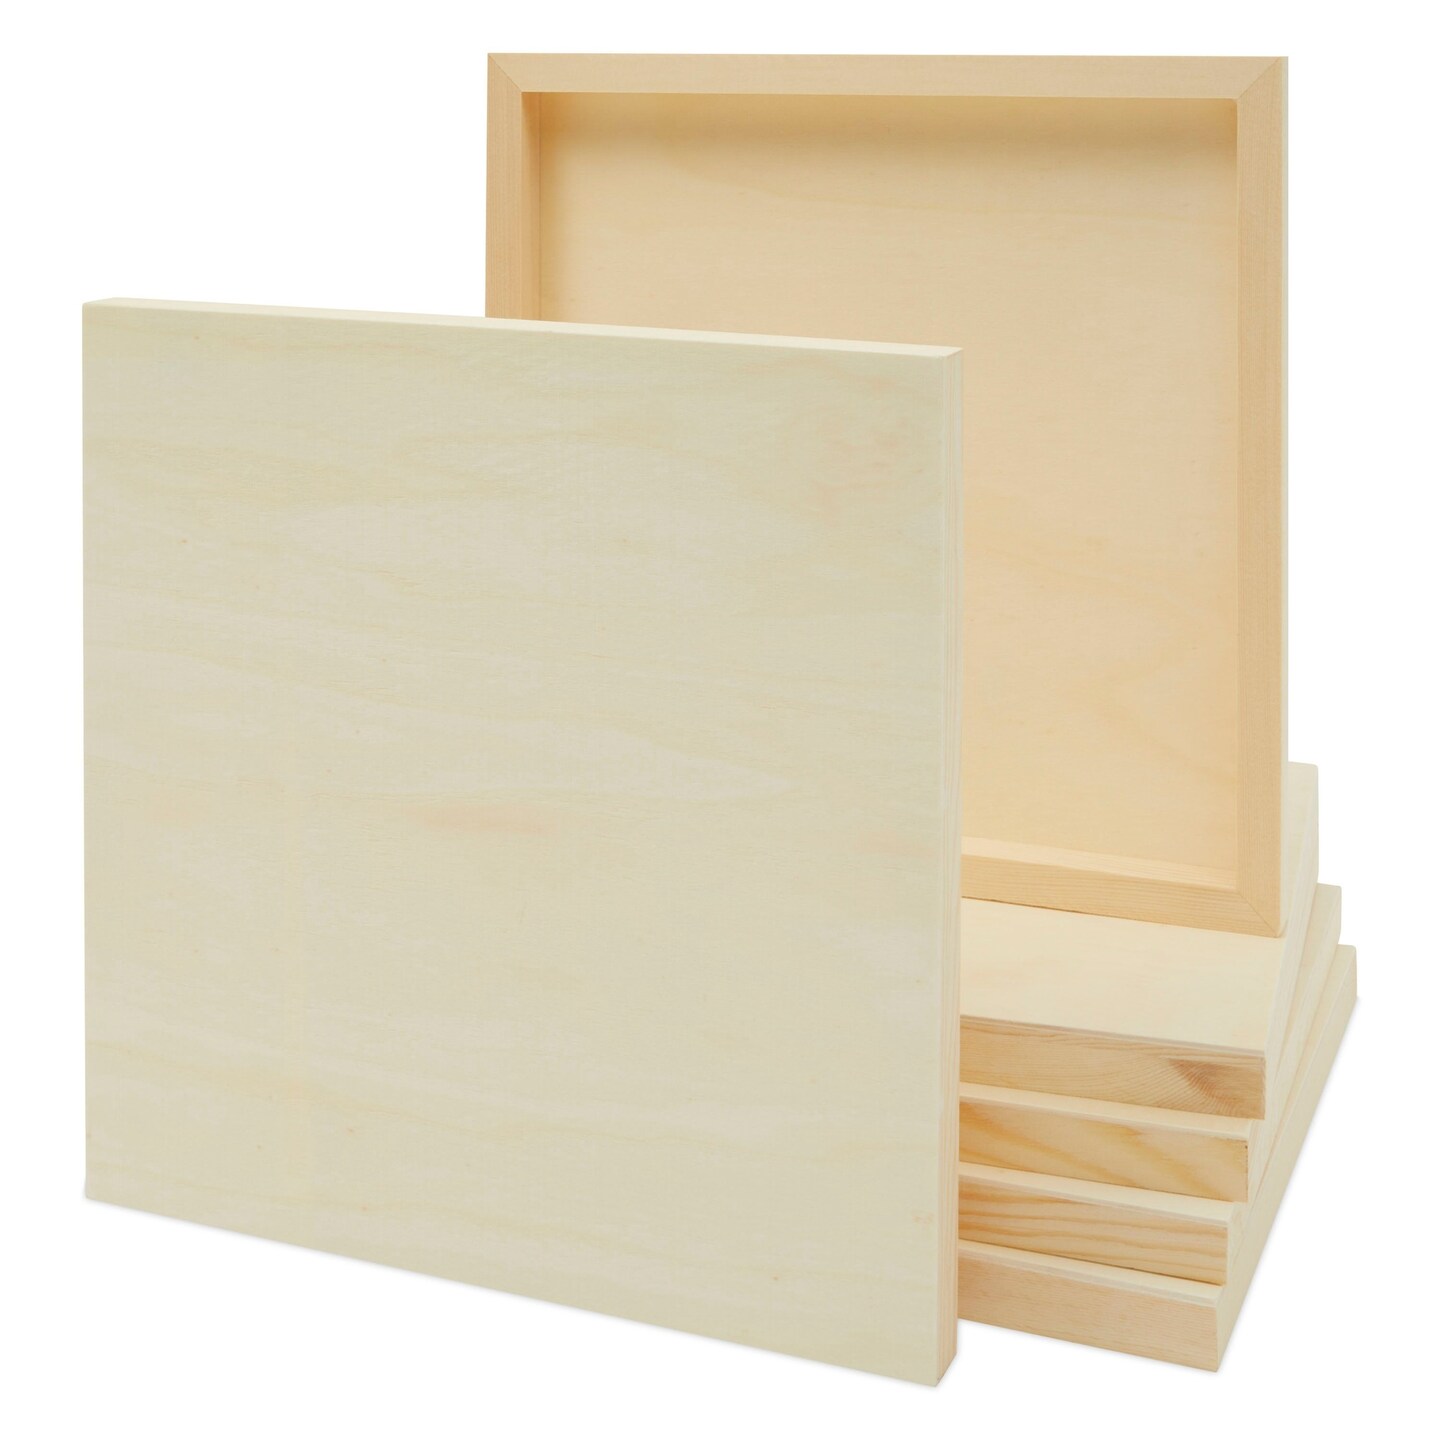 6 Pack Unfinished Square Wood Panels for Painting, 12x12 Wooden